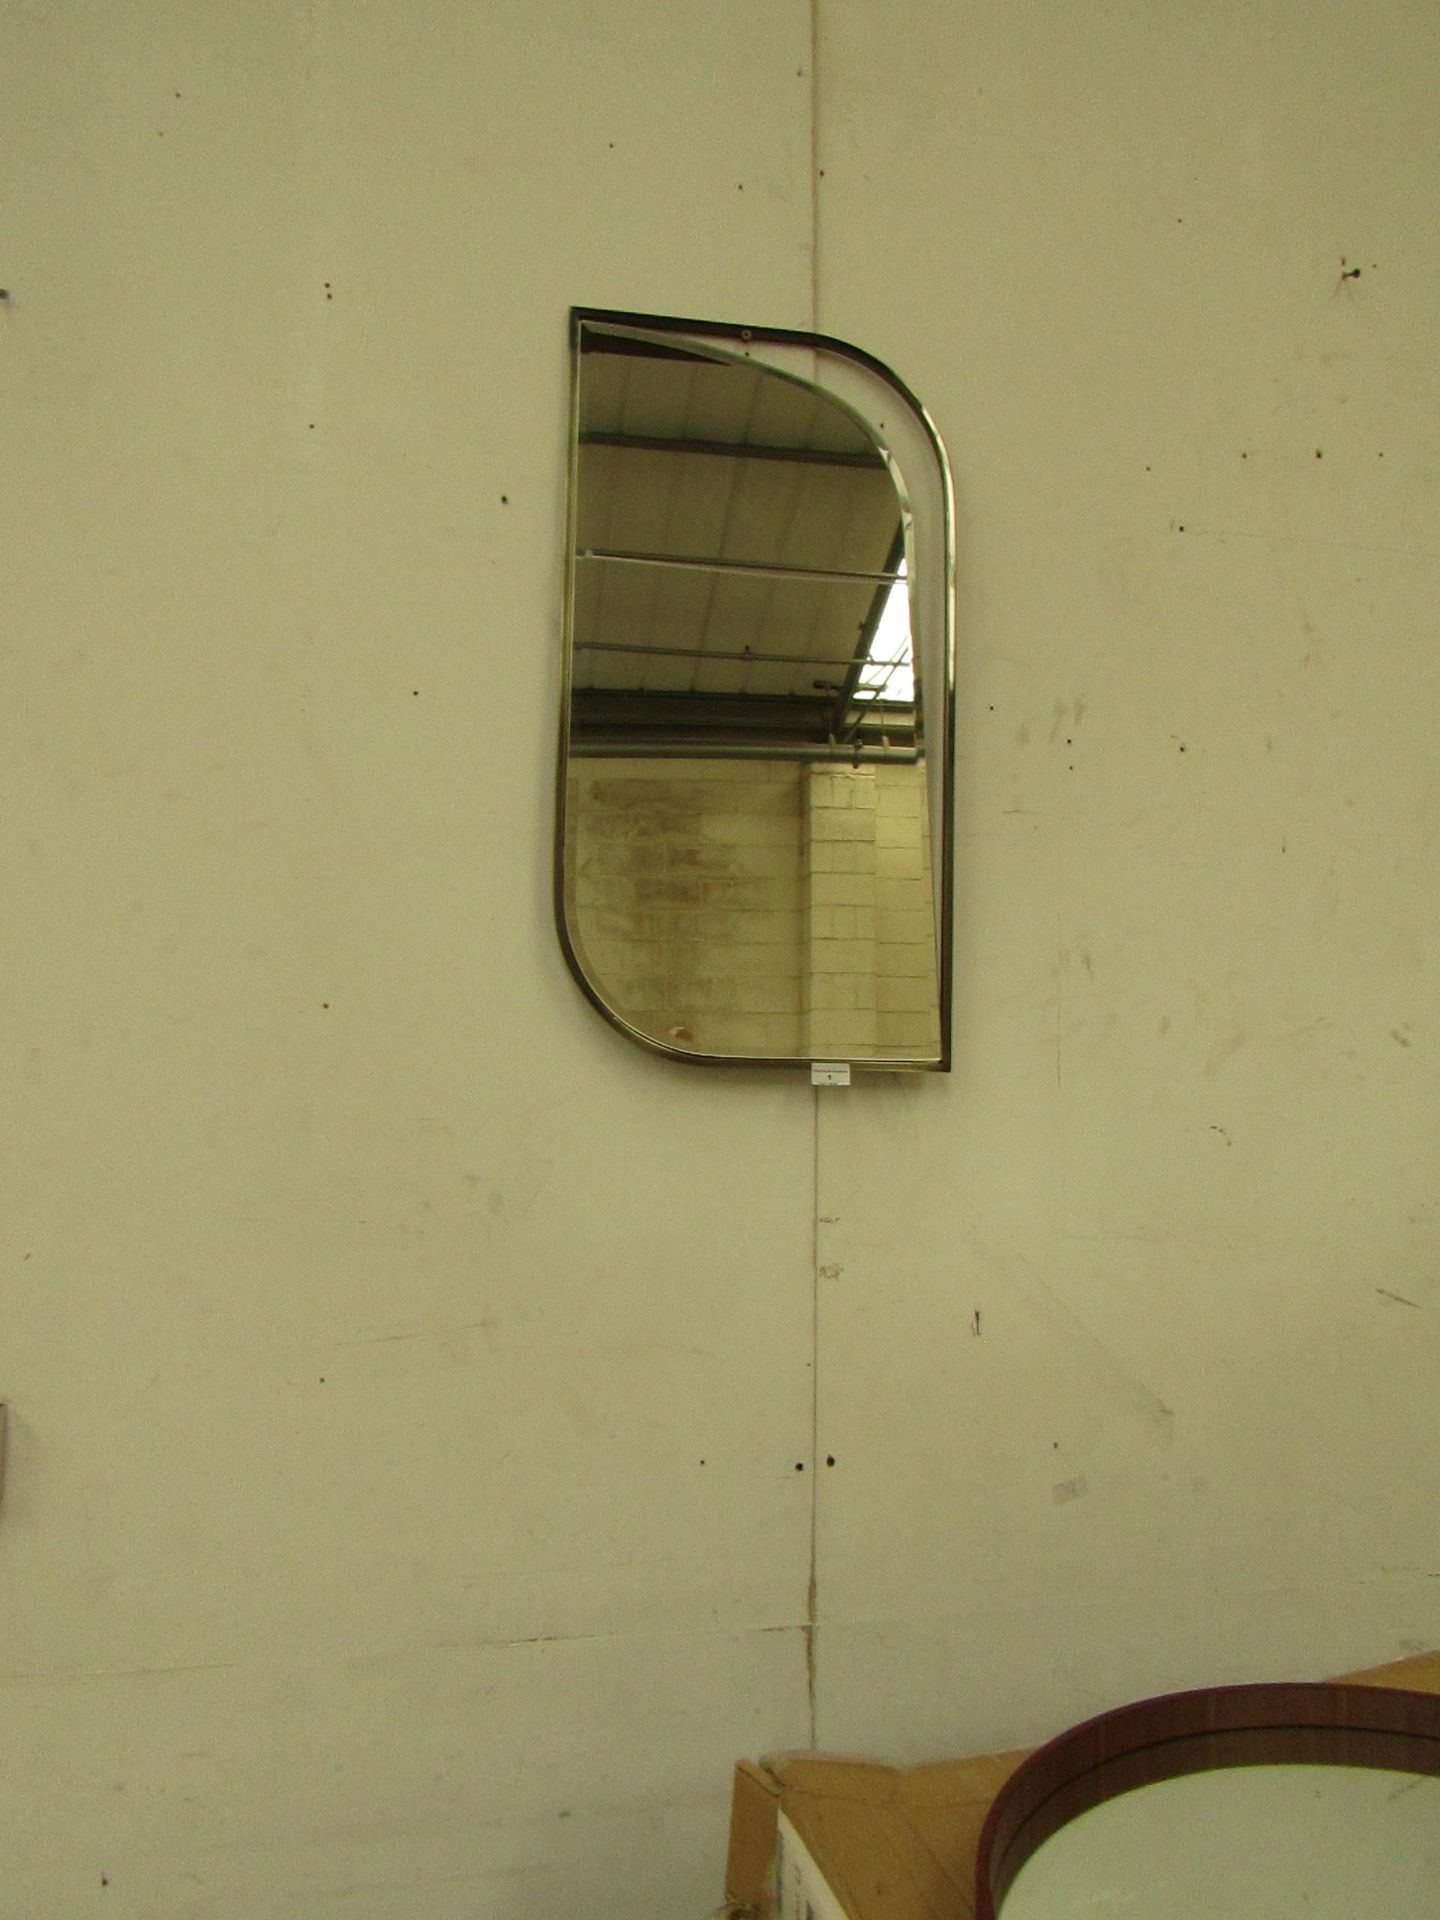 | 1X | AM PM ISANDRO MIRROR 75X40CM| LOOKS UNUSED AND BOXED | RRP CIRCA £160 |